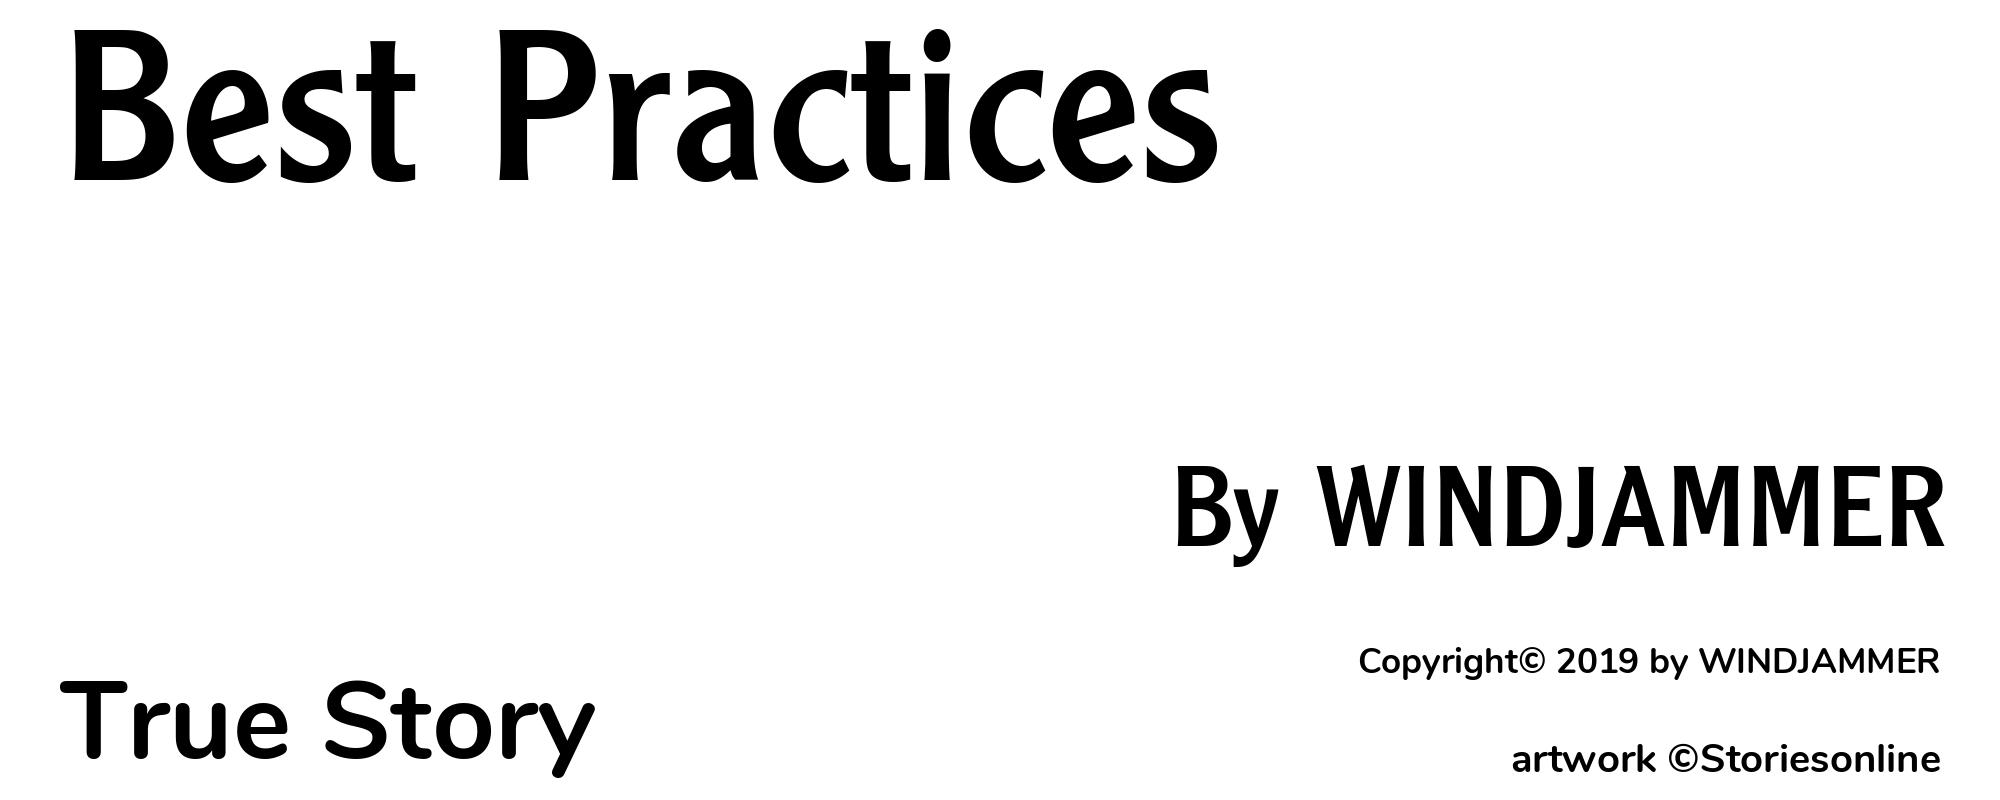 Best Practices - Cover